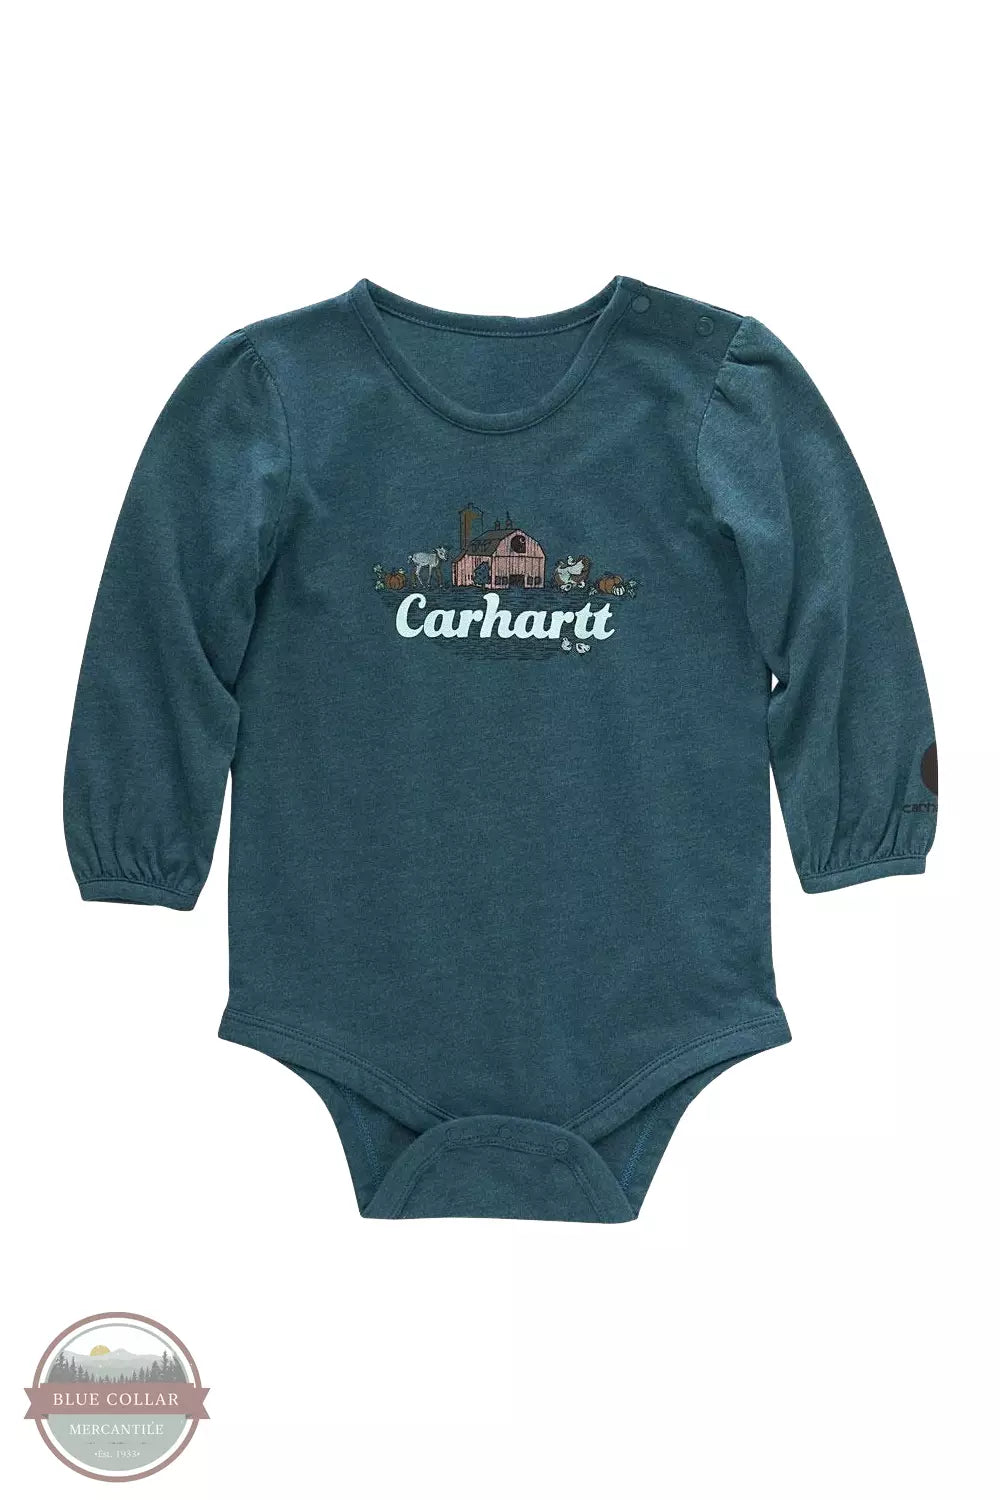 Carhartt CA9994-G247H Long Sleeve Farm Bodysuit in Shaded Spruce Front View